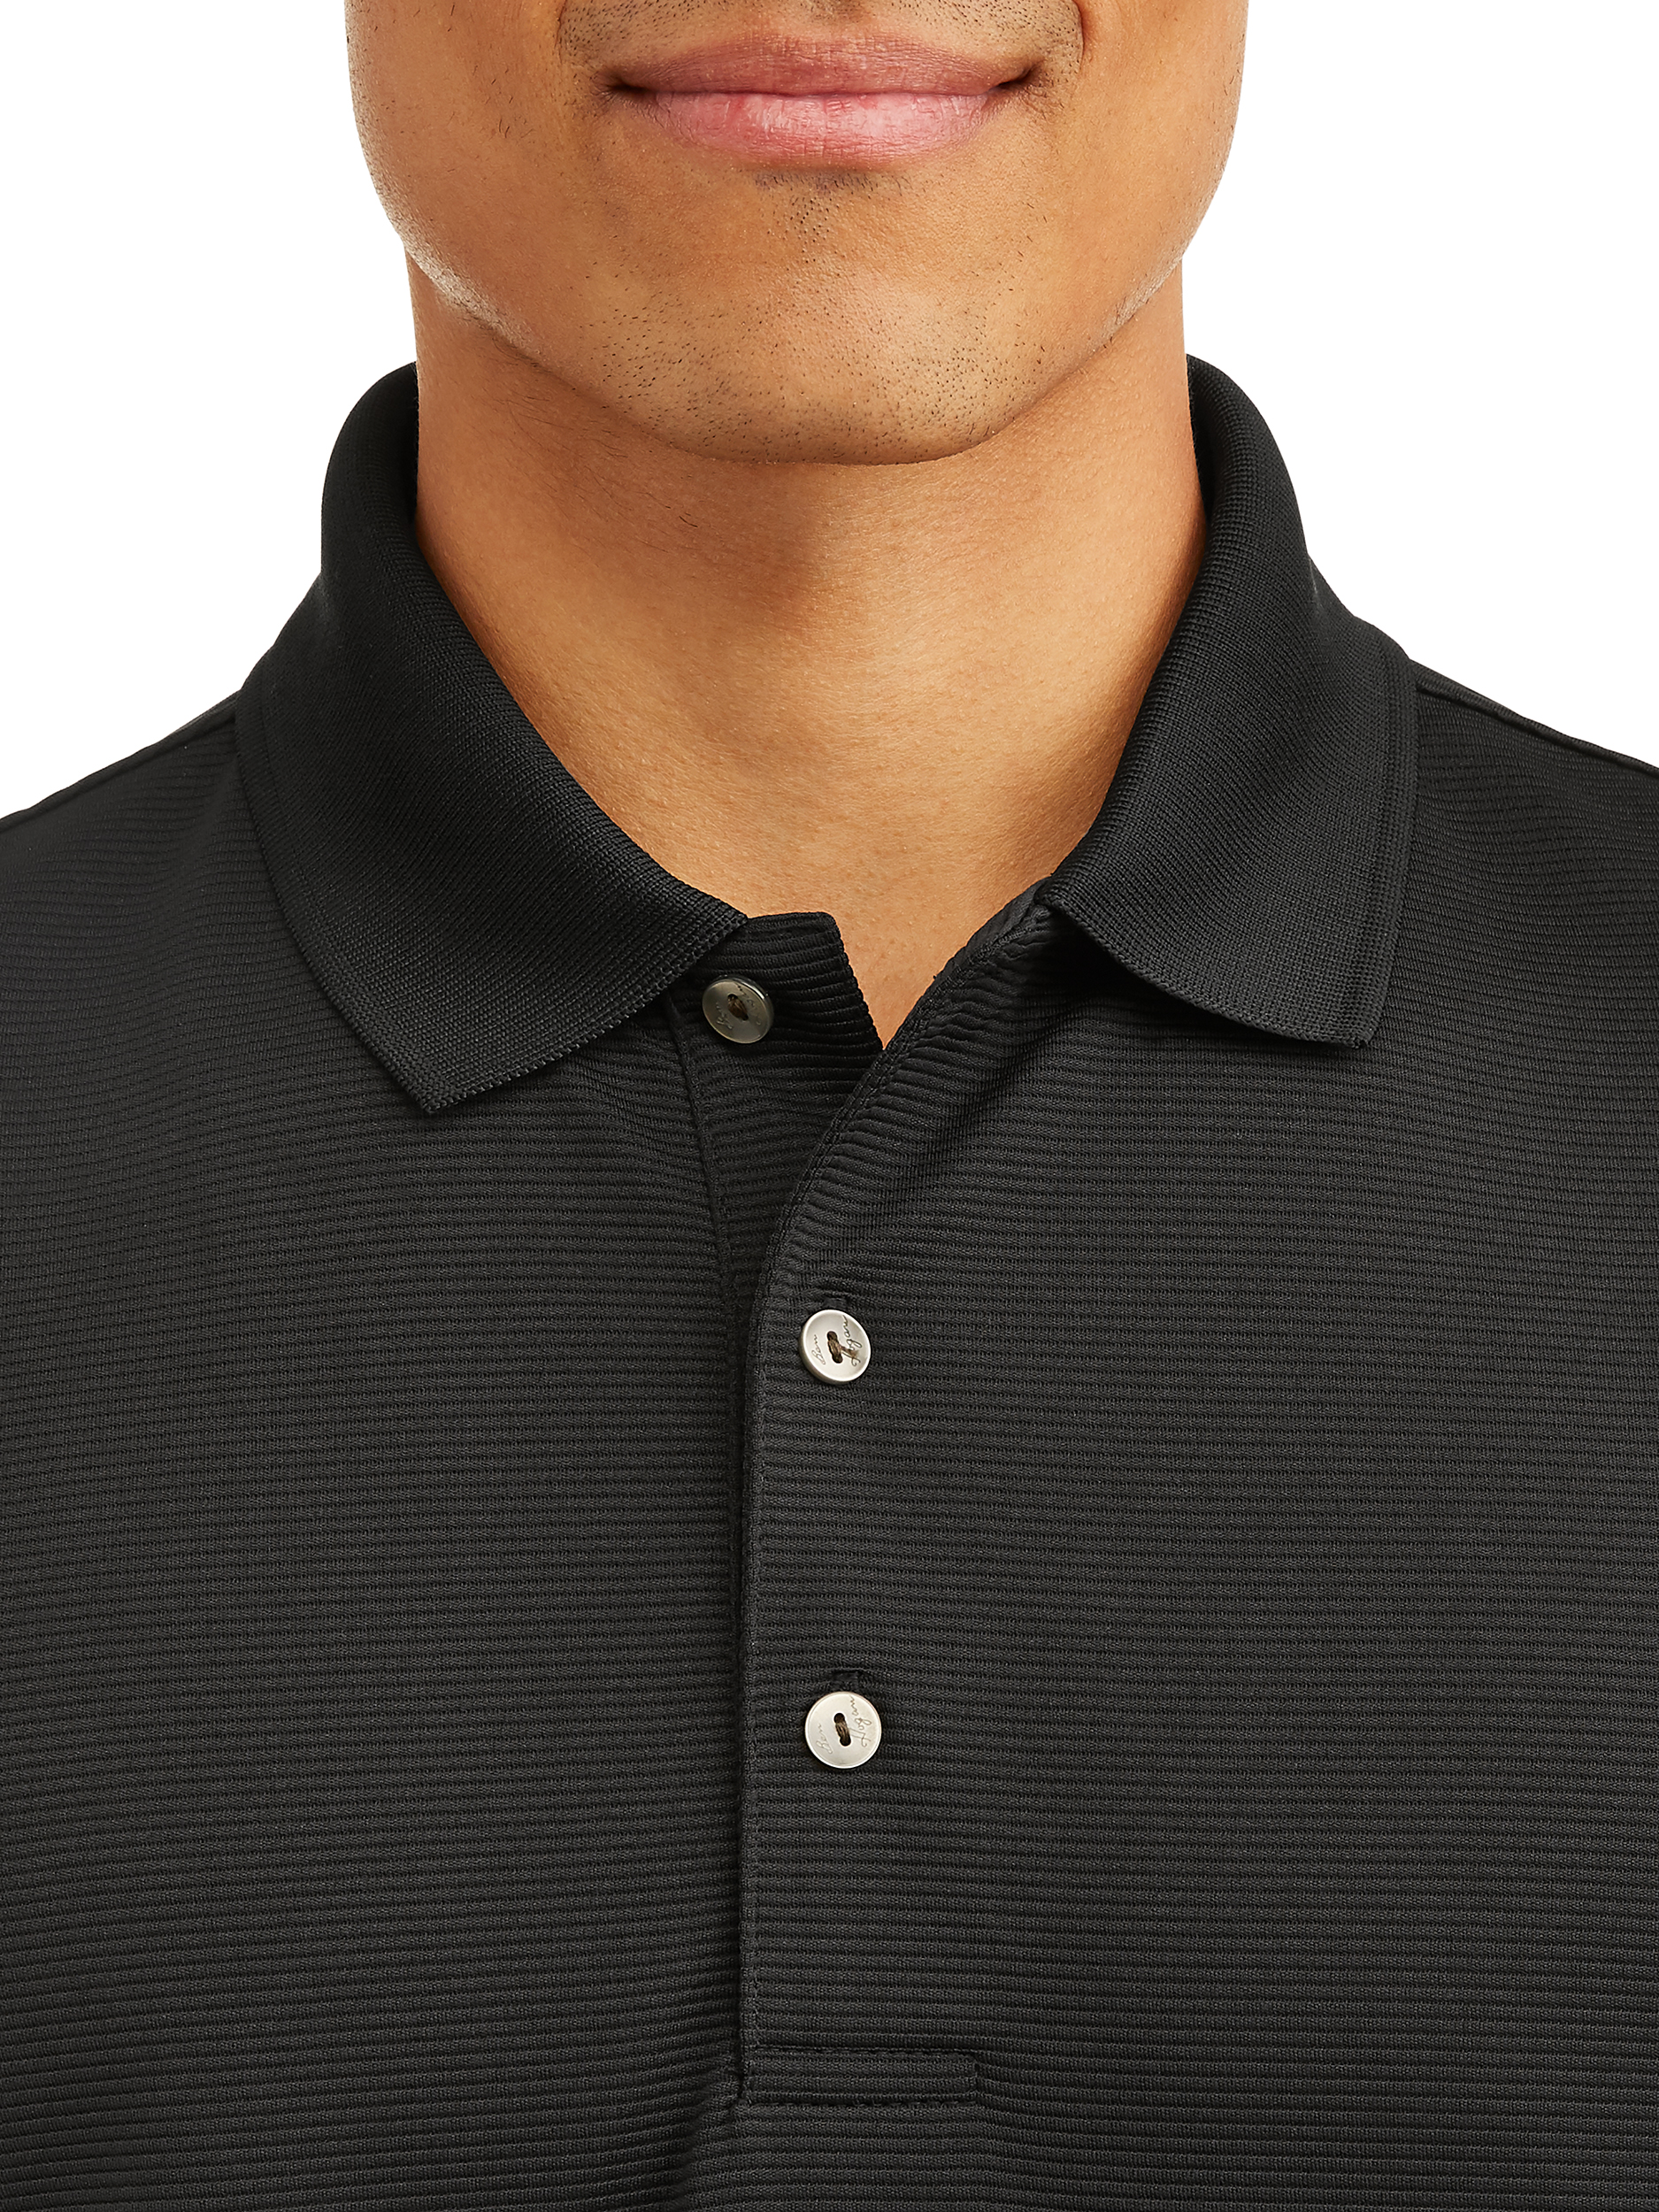 Ben Hogan Men's & Big Men's Performance Easy Care Solid Short Sleeve Polo Shirt, up to 5XL - image 3 of 6